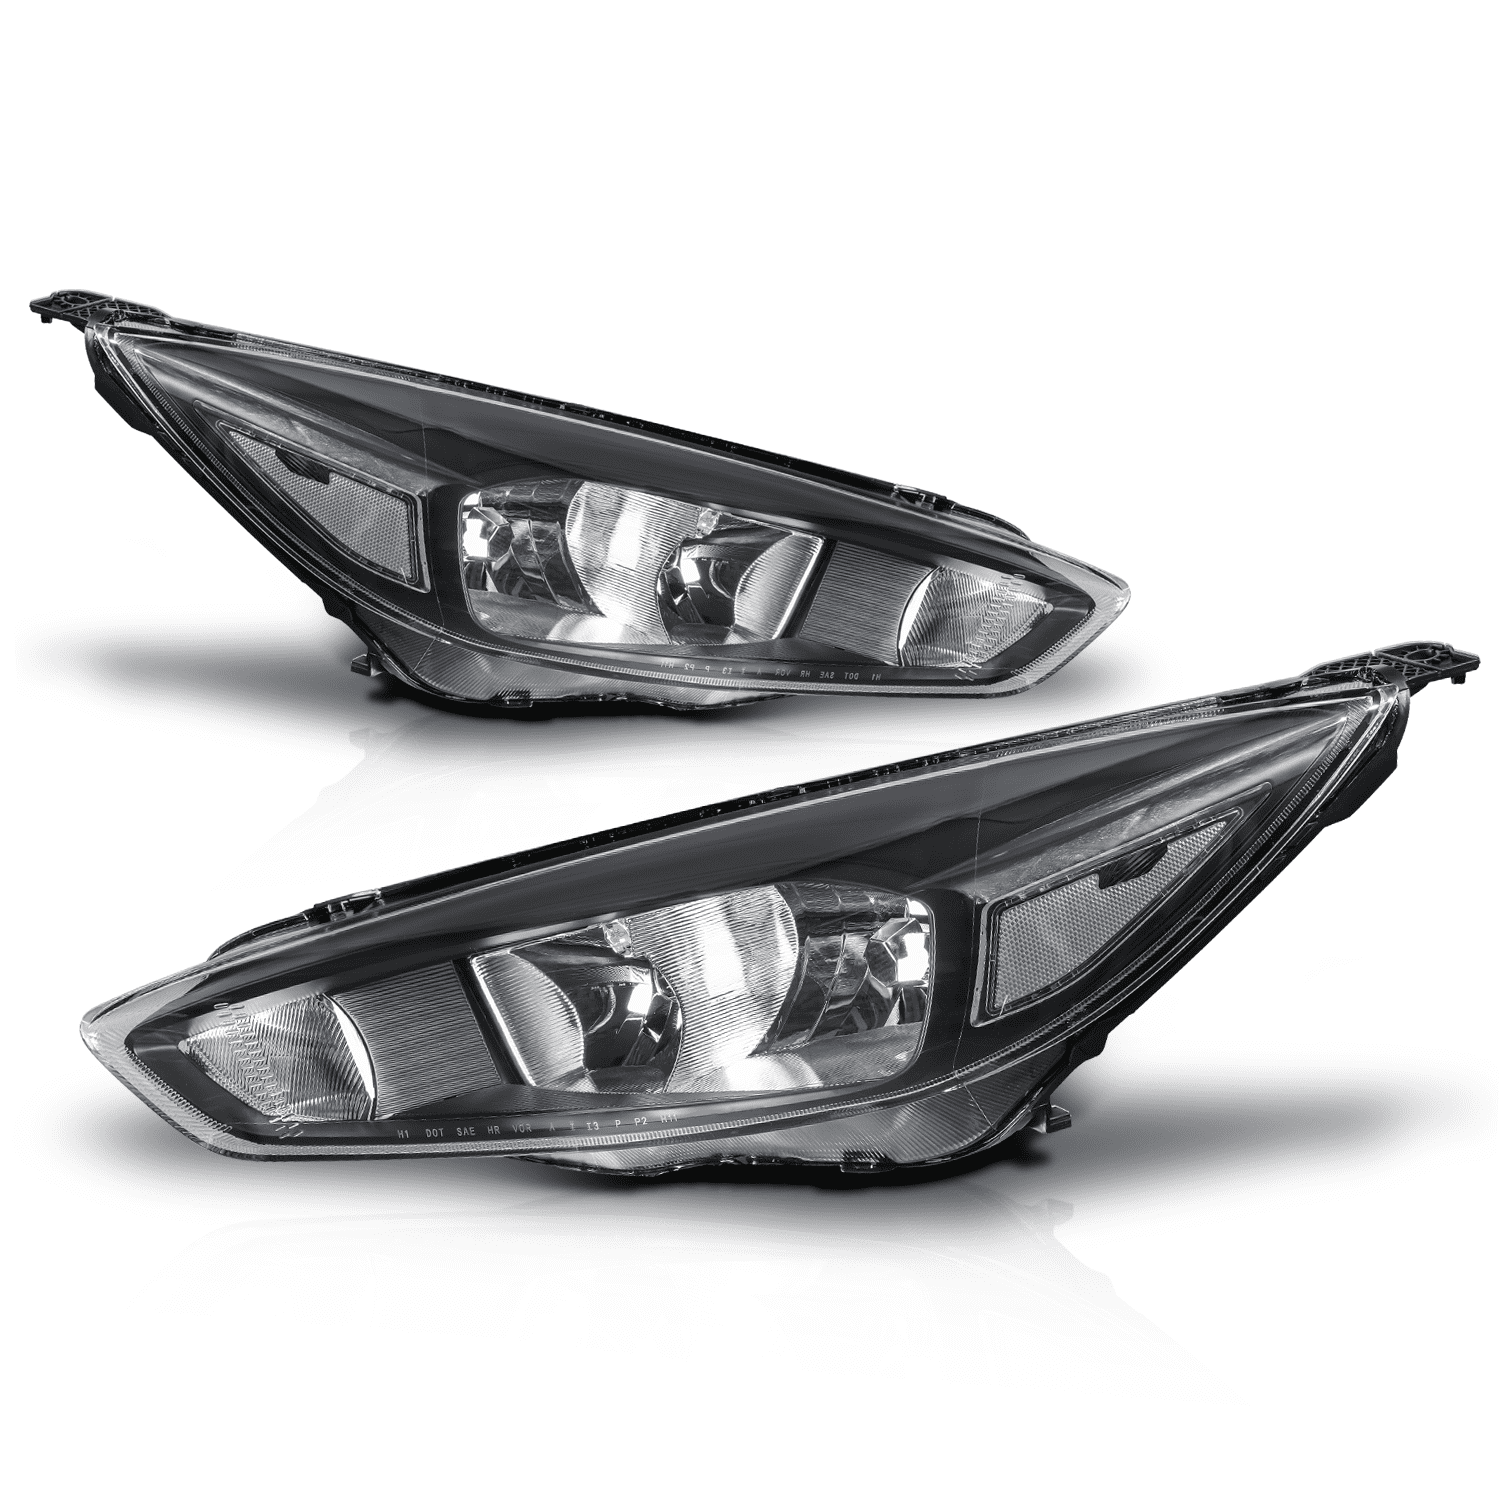 M-AUTO Headlight Assembly with 2 Pairs Pre-Assembled LED Bulbs for 15 16 17  18 Ford Focus, Chrome Housing Clear Lens Clear Corner